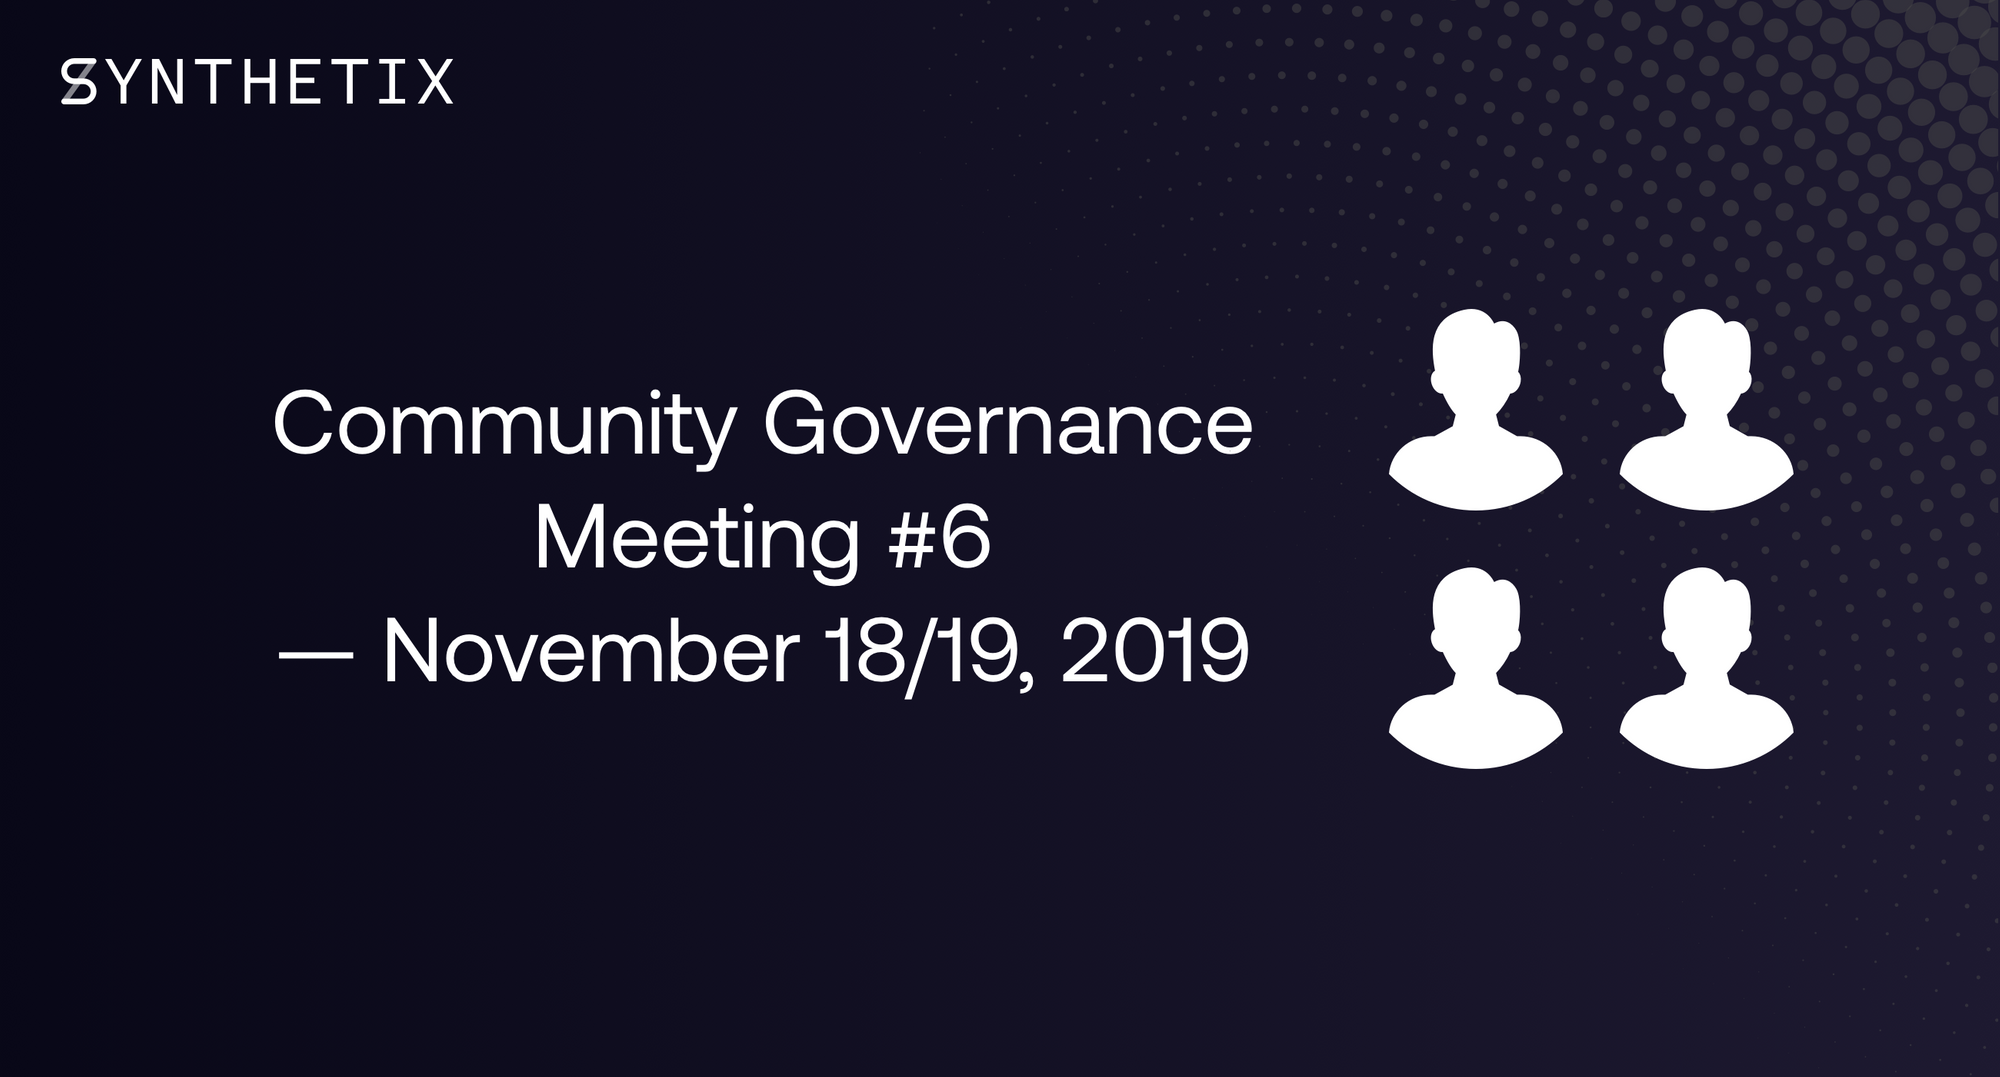 Join us on November 18/19 for the next community governance call!